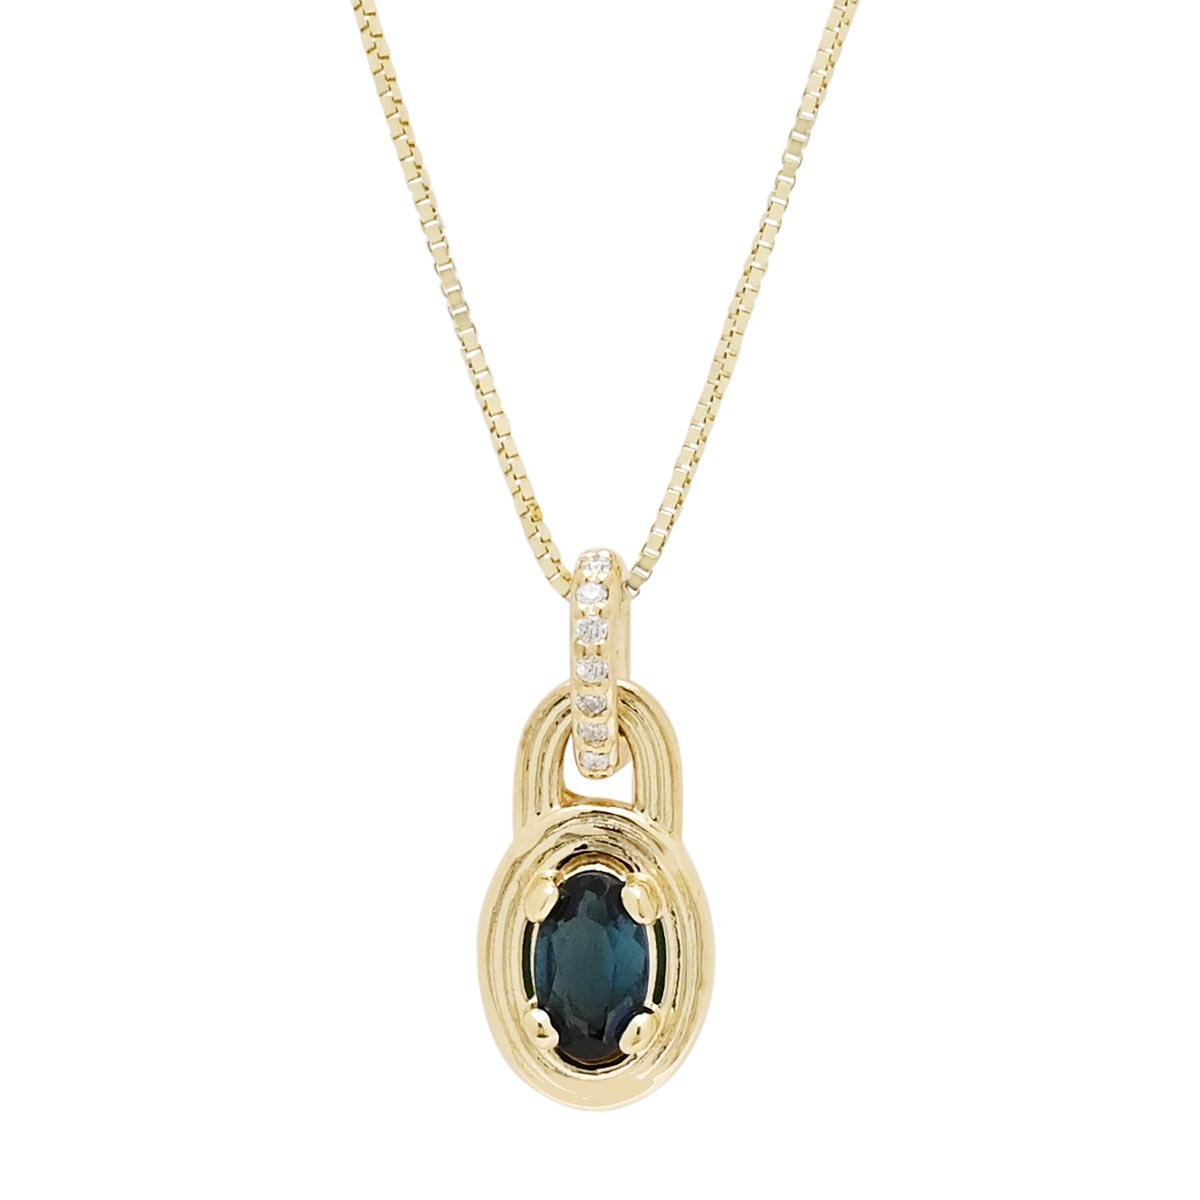 Maine Indicolite Tourmaline Necklace in 14kt Yellow Gold with Diamonds (.02ct tw)